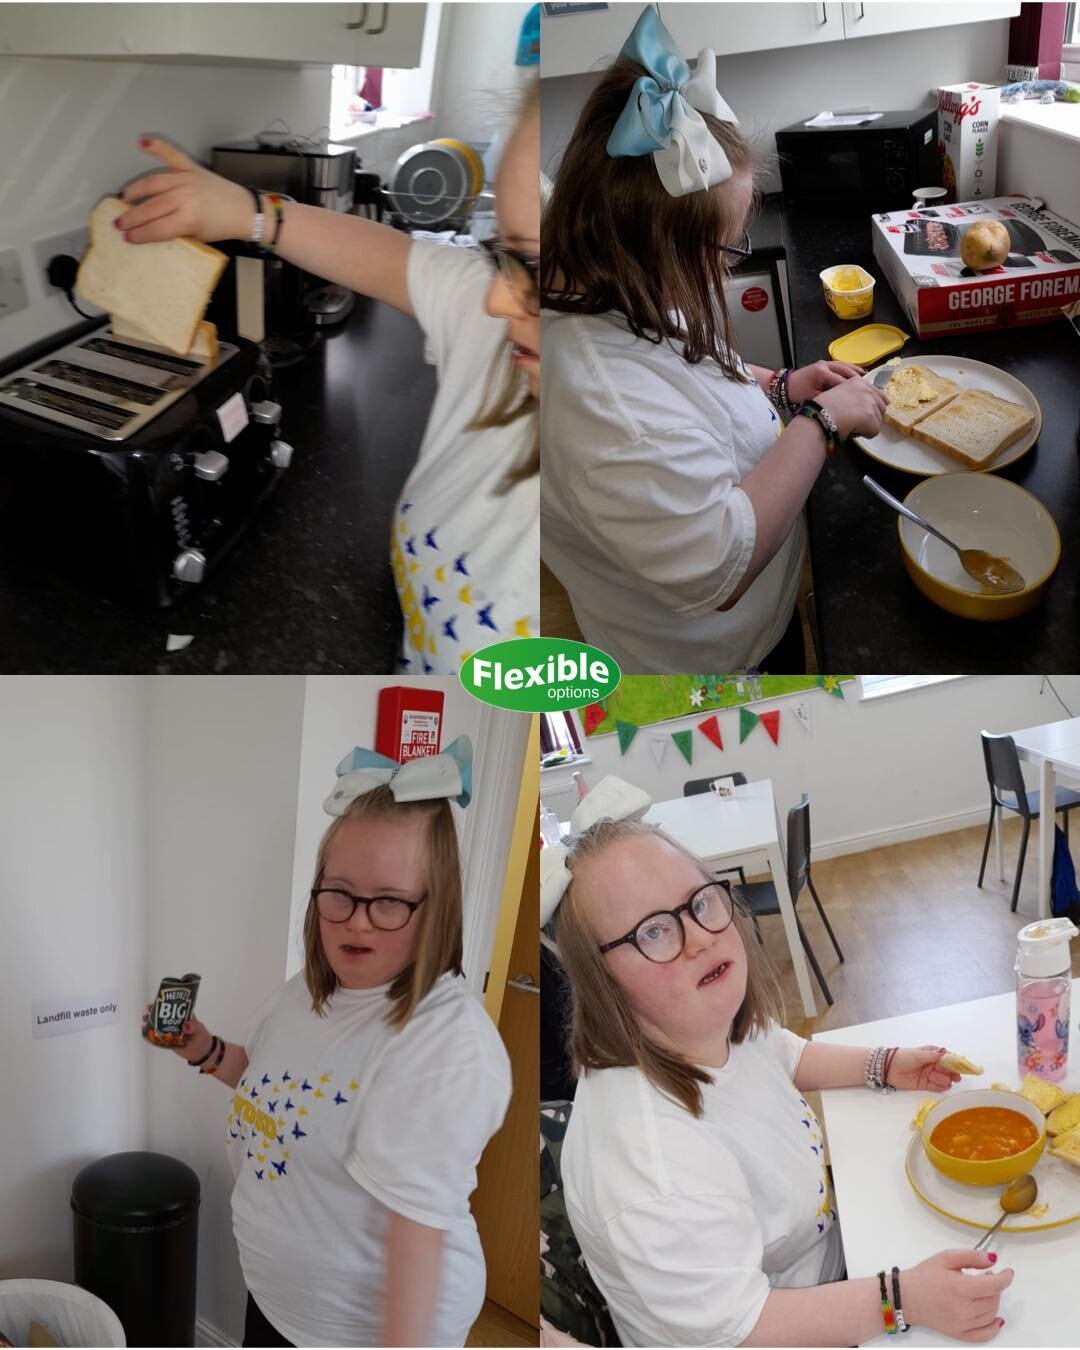 Leah was all over with making her soup. Her cooking chops are really starting to hot up. Oh, yeah.

#food #foodprep #imadethis #learningdisabilities